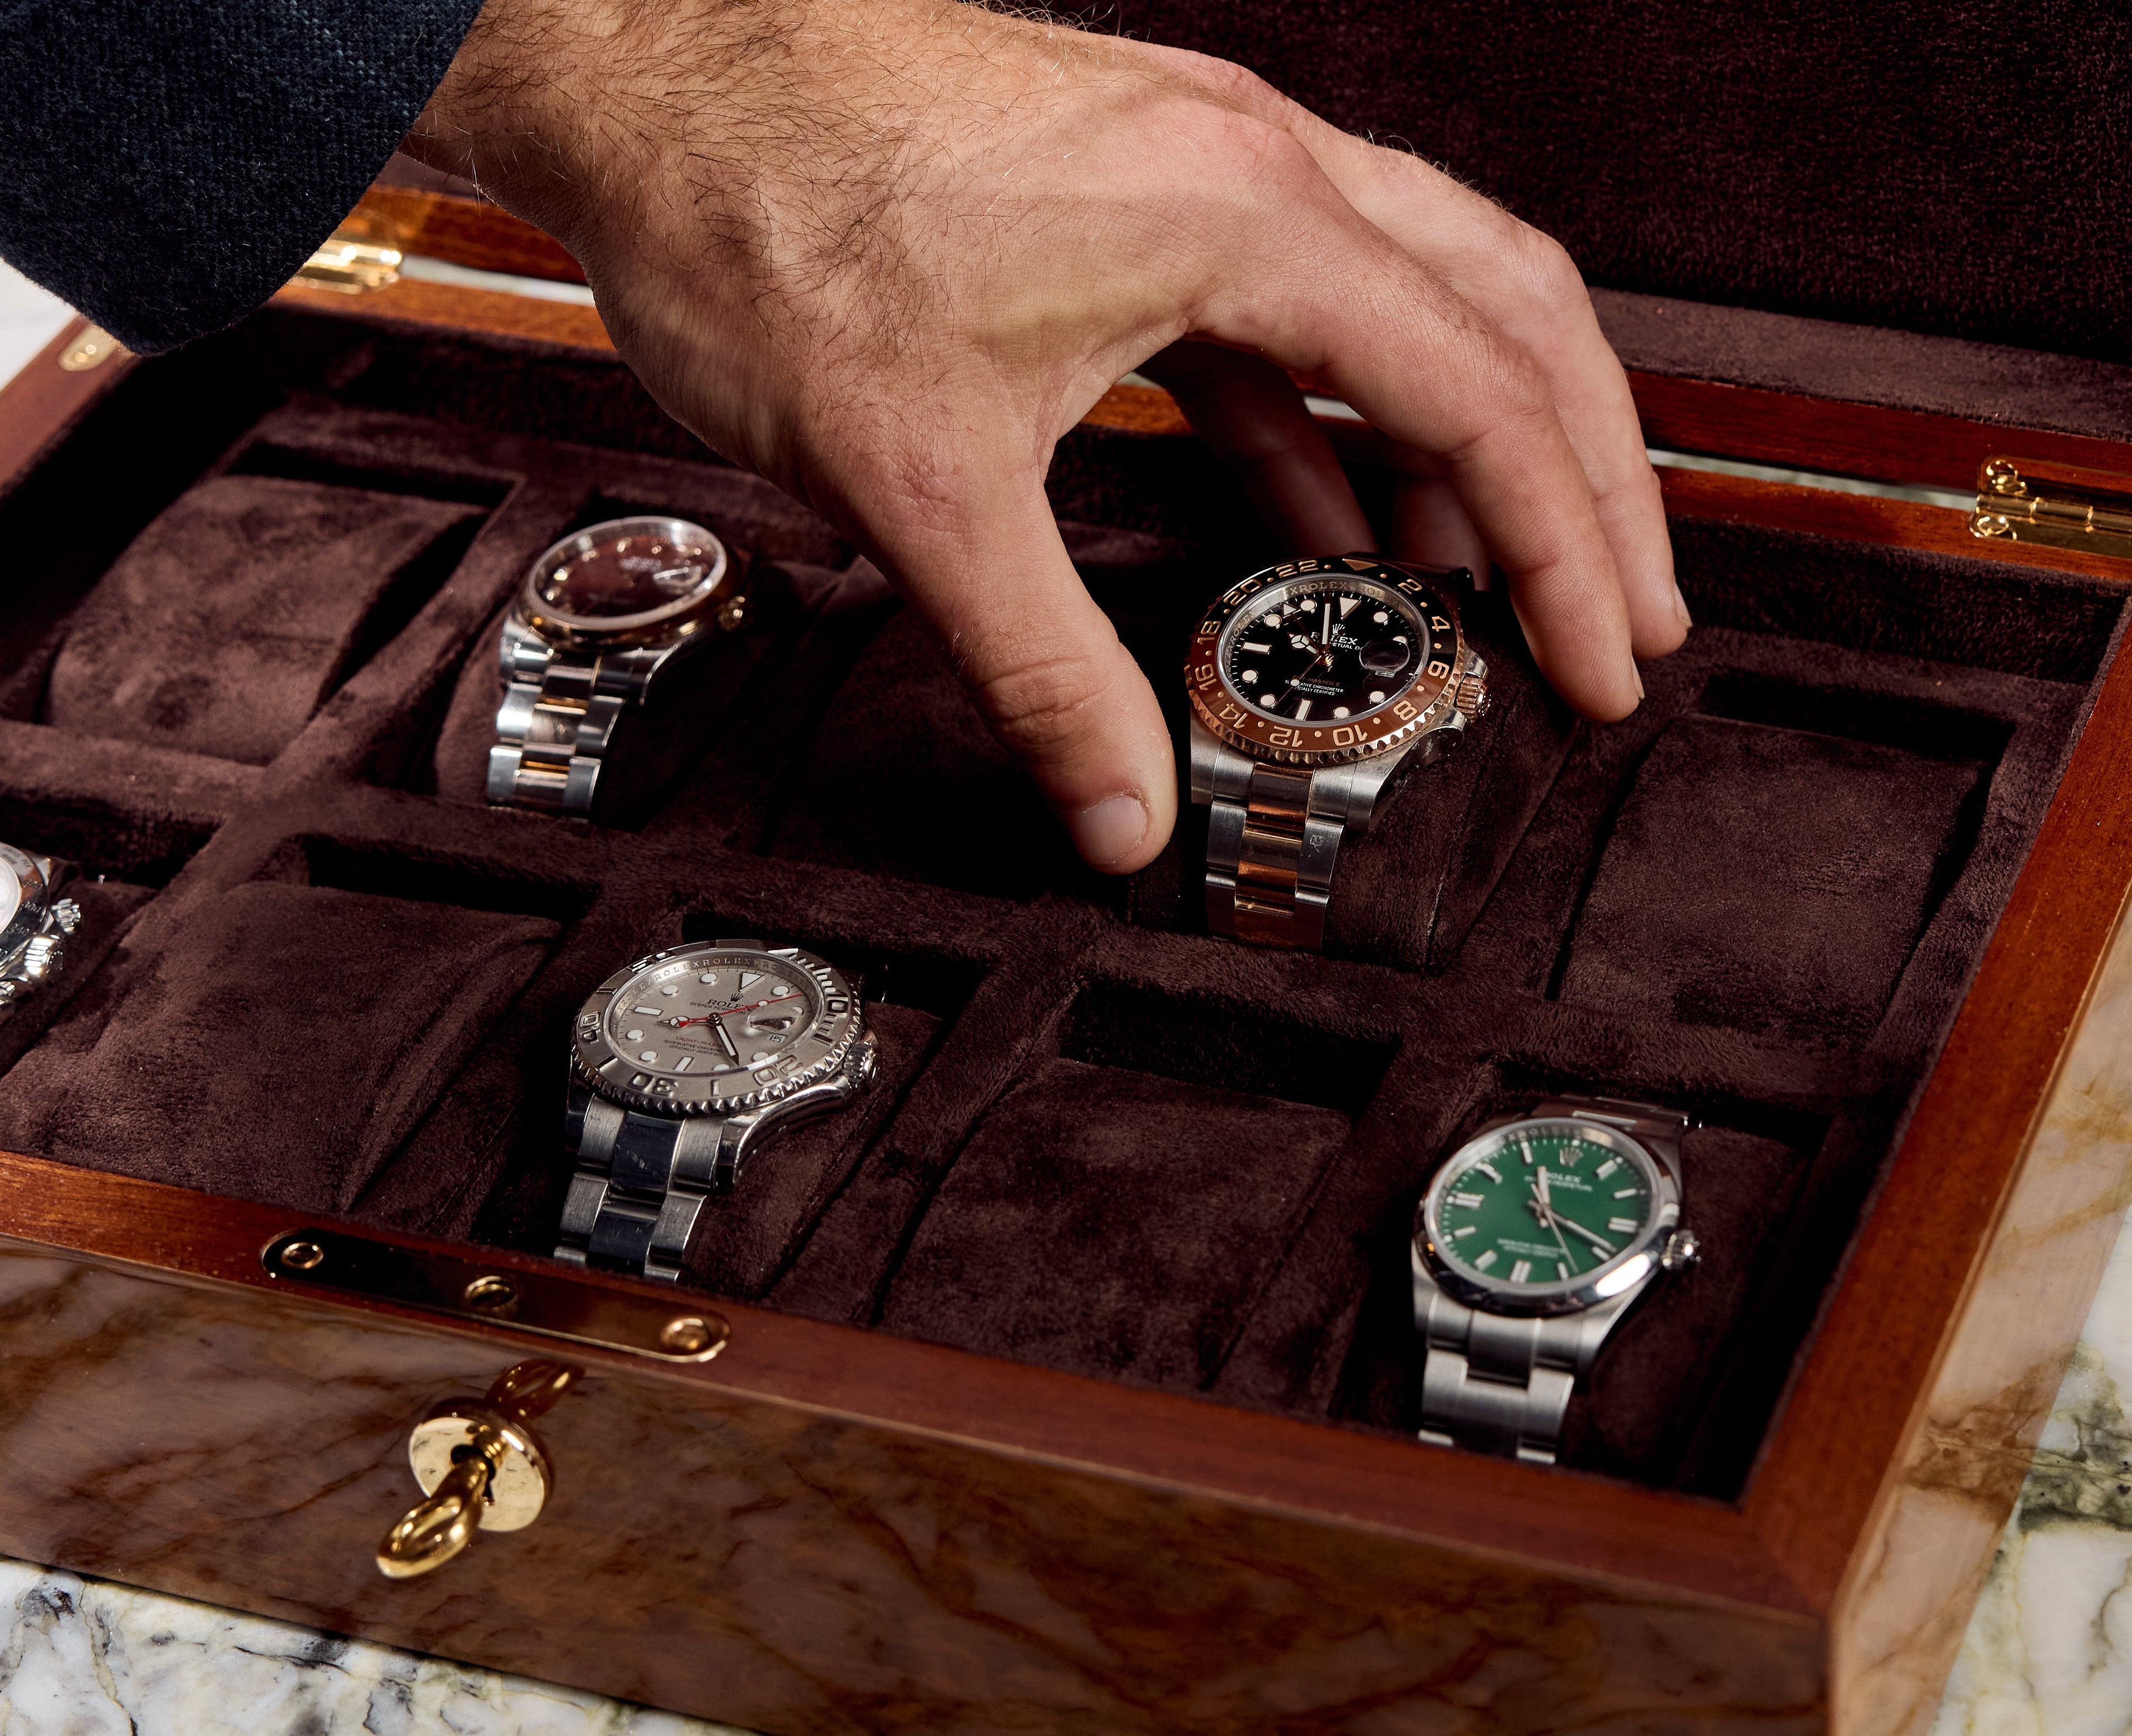 Article: How to clean your luxury watches